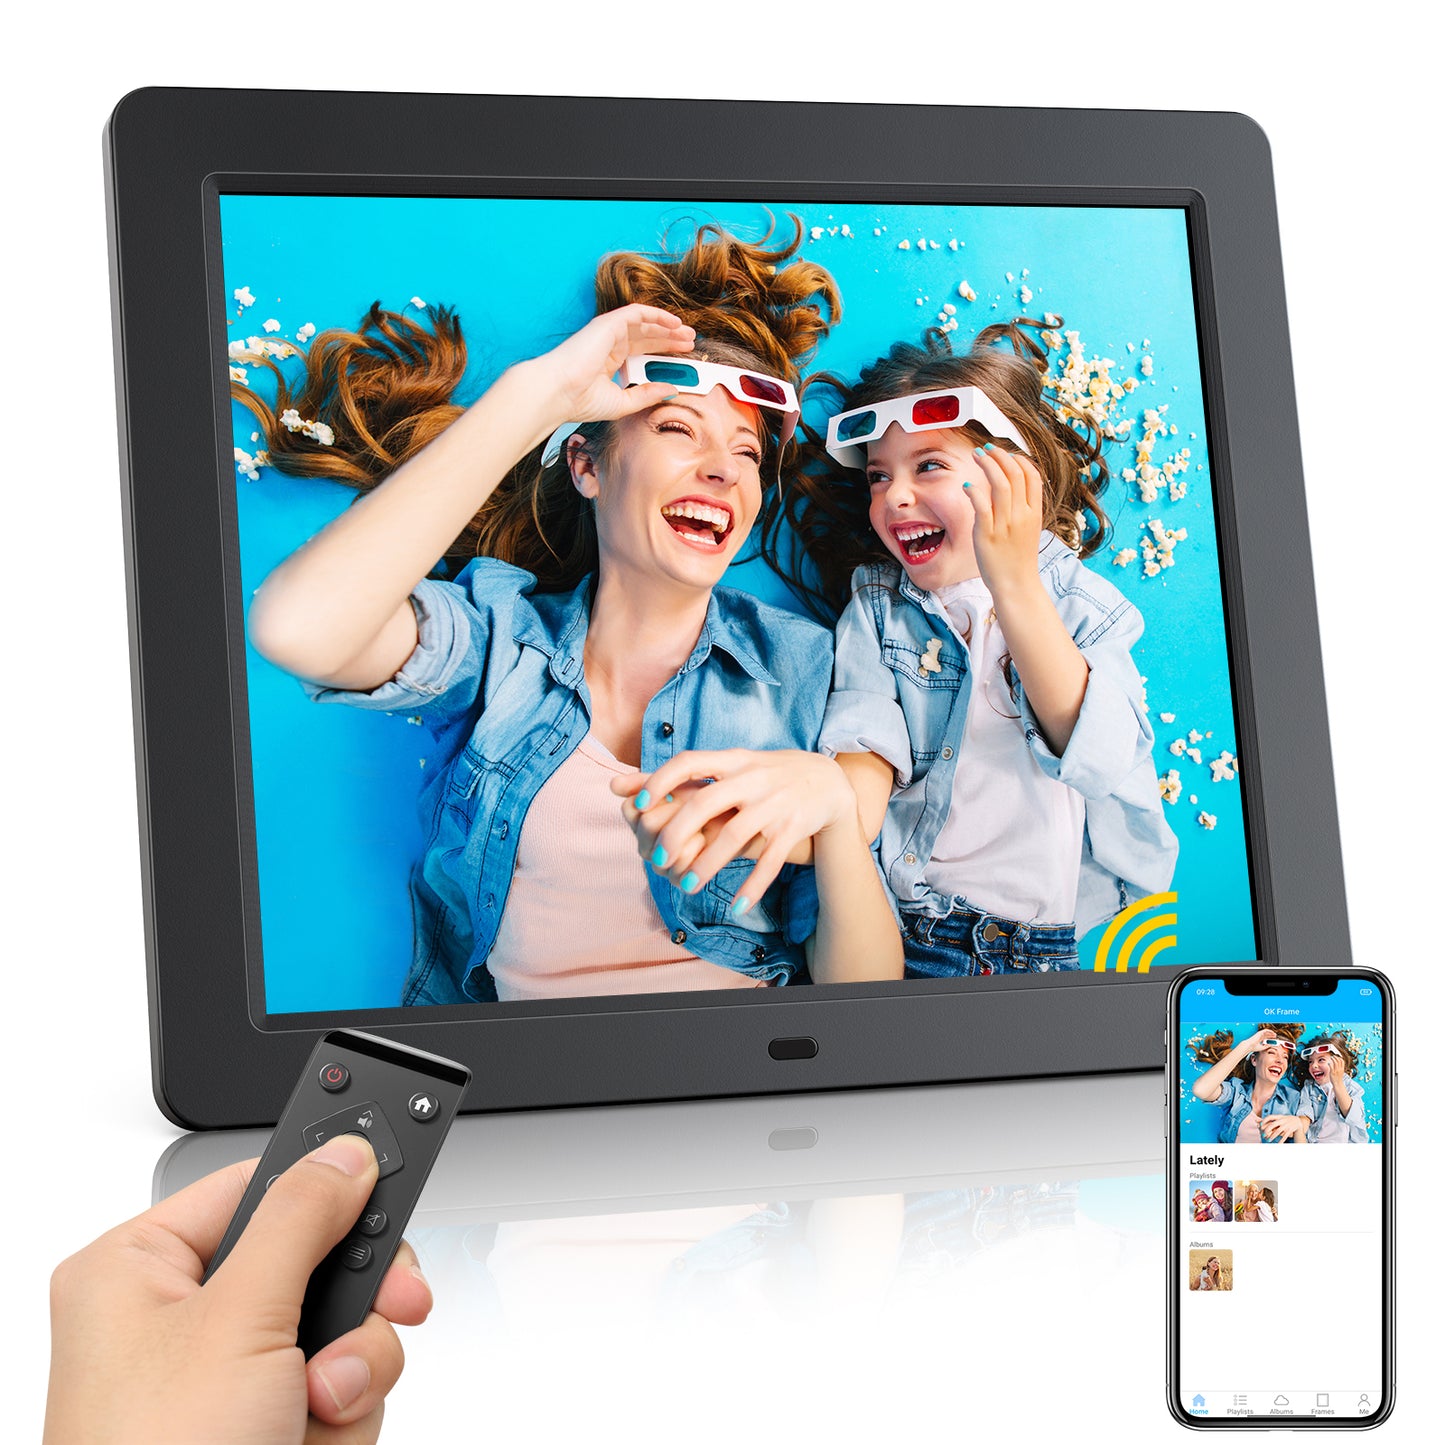 JEEMAK WiFi Digital Picture Frame 15" IPS Screen Smart Cloud Picture Frame Auto-Rotate remote control Share Photos Videos via App & Email from Anywhere, Motion Sensor, USB & SD Slot, Auto-Rotate